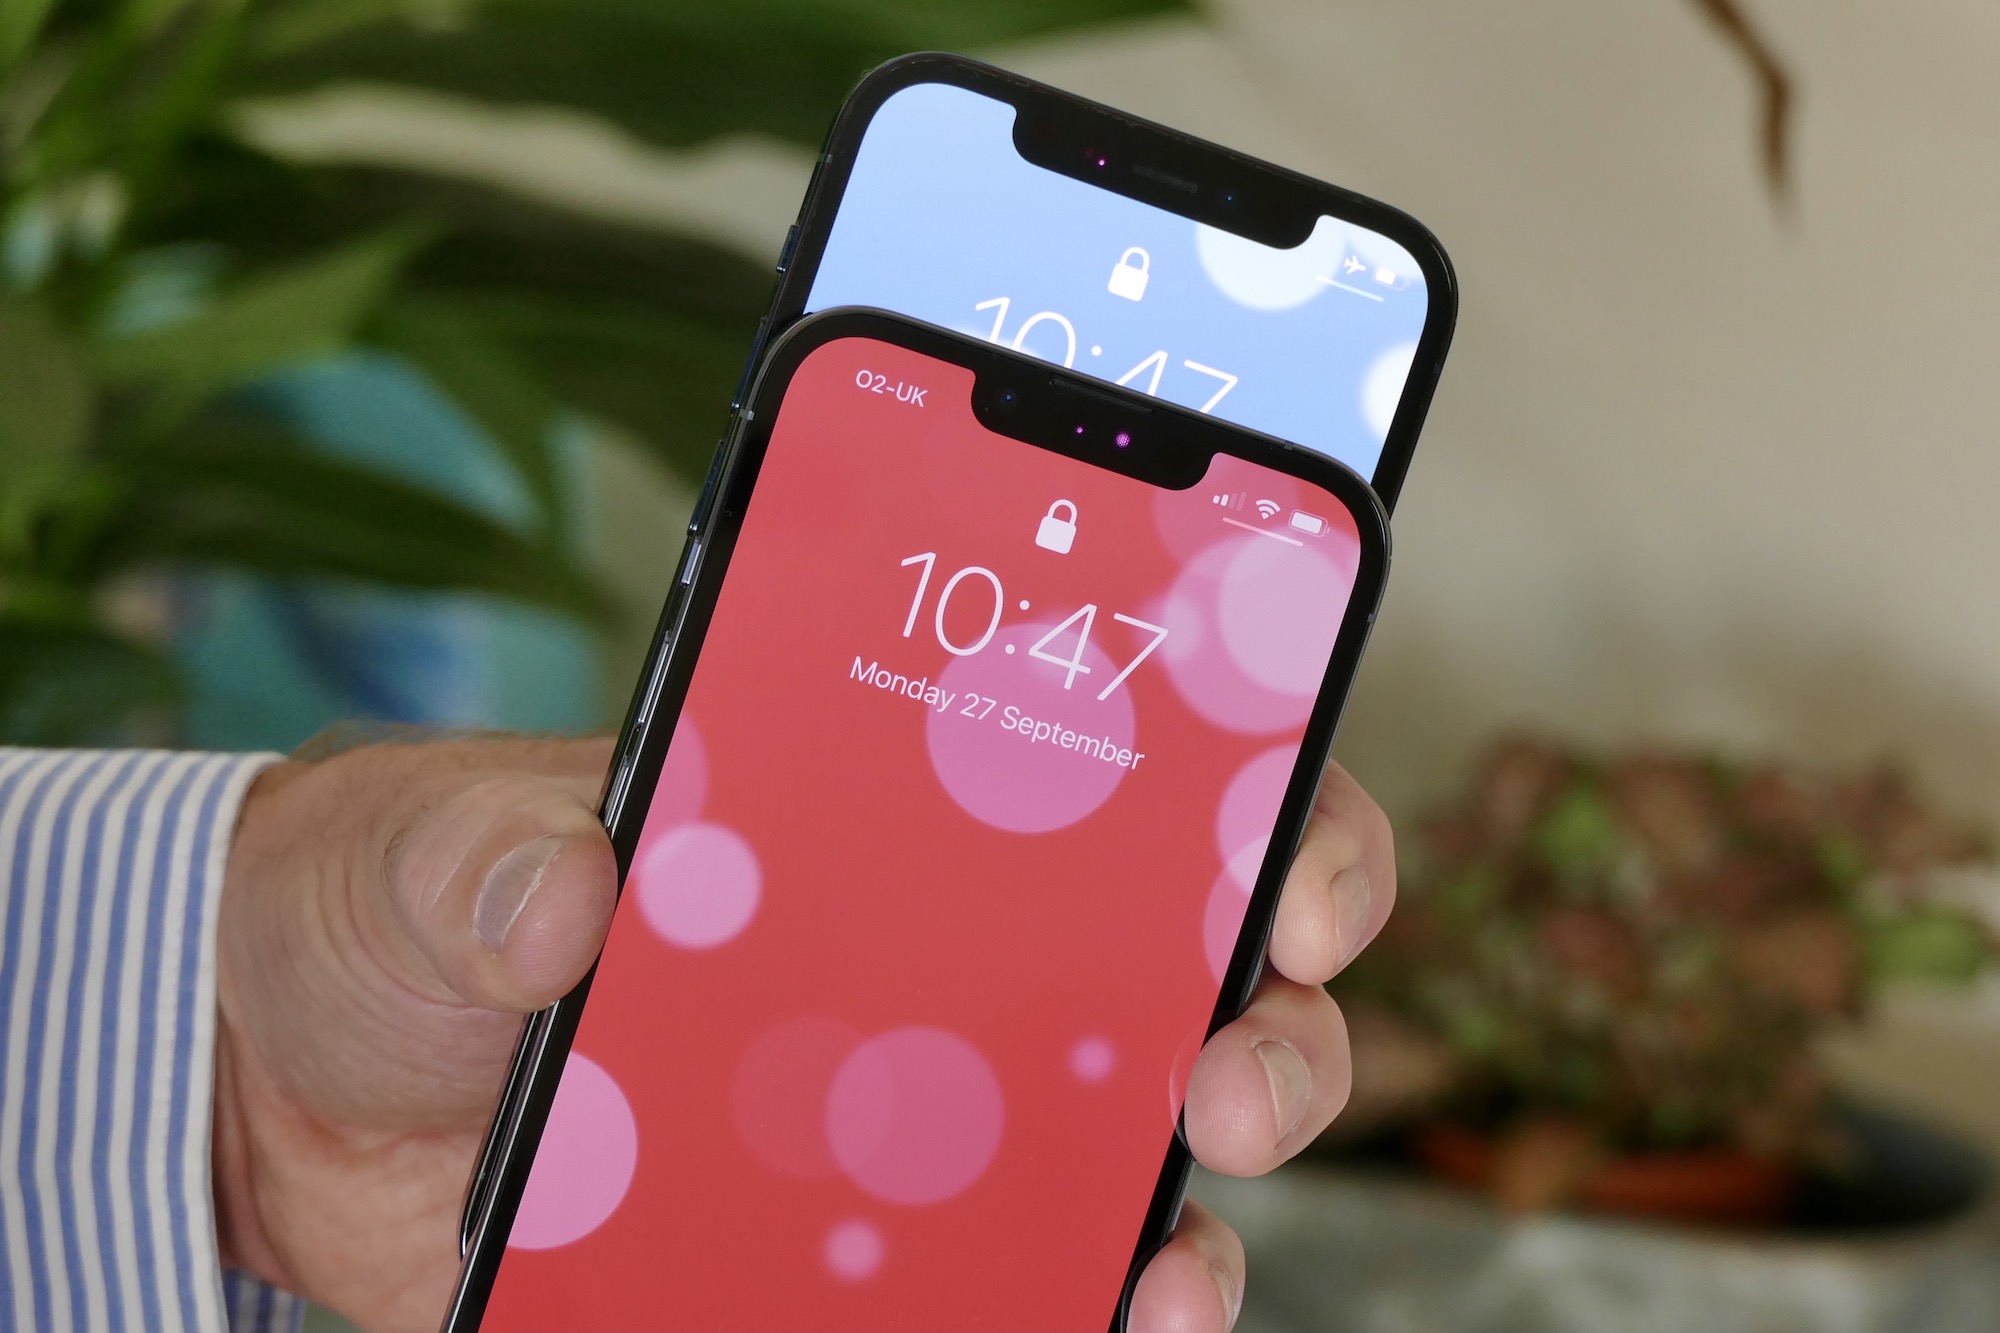 iPhone 13 Pro's smaller notch compared to the iPhone 12 Pro's larger notch.